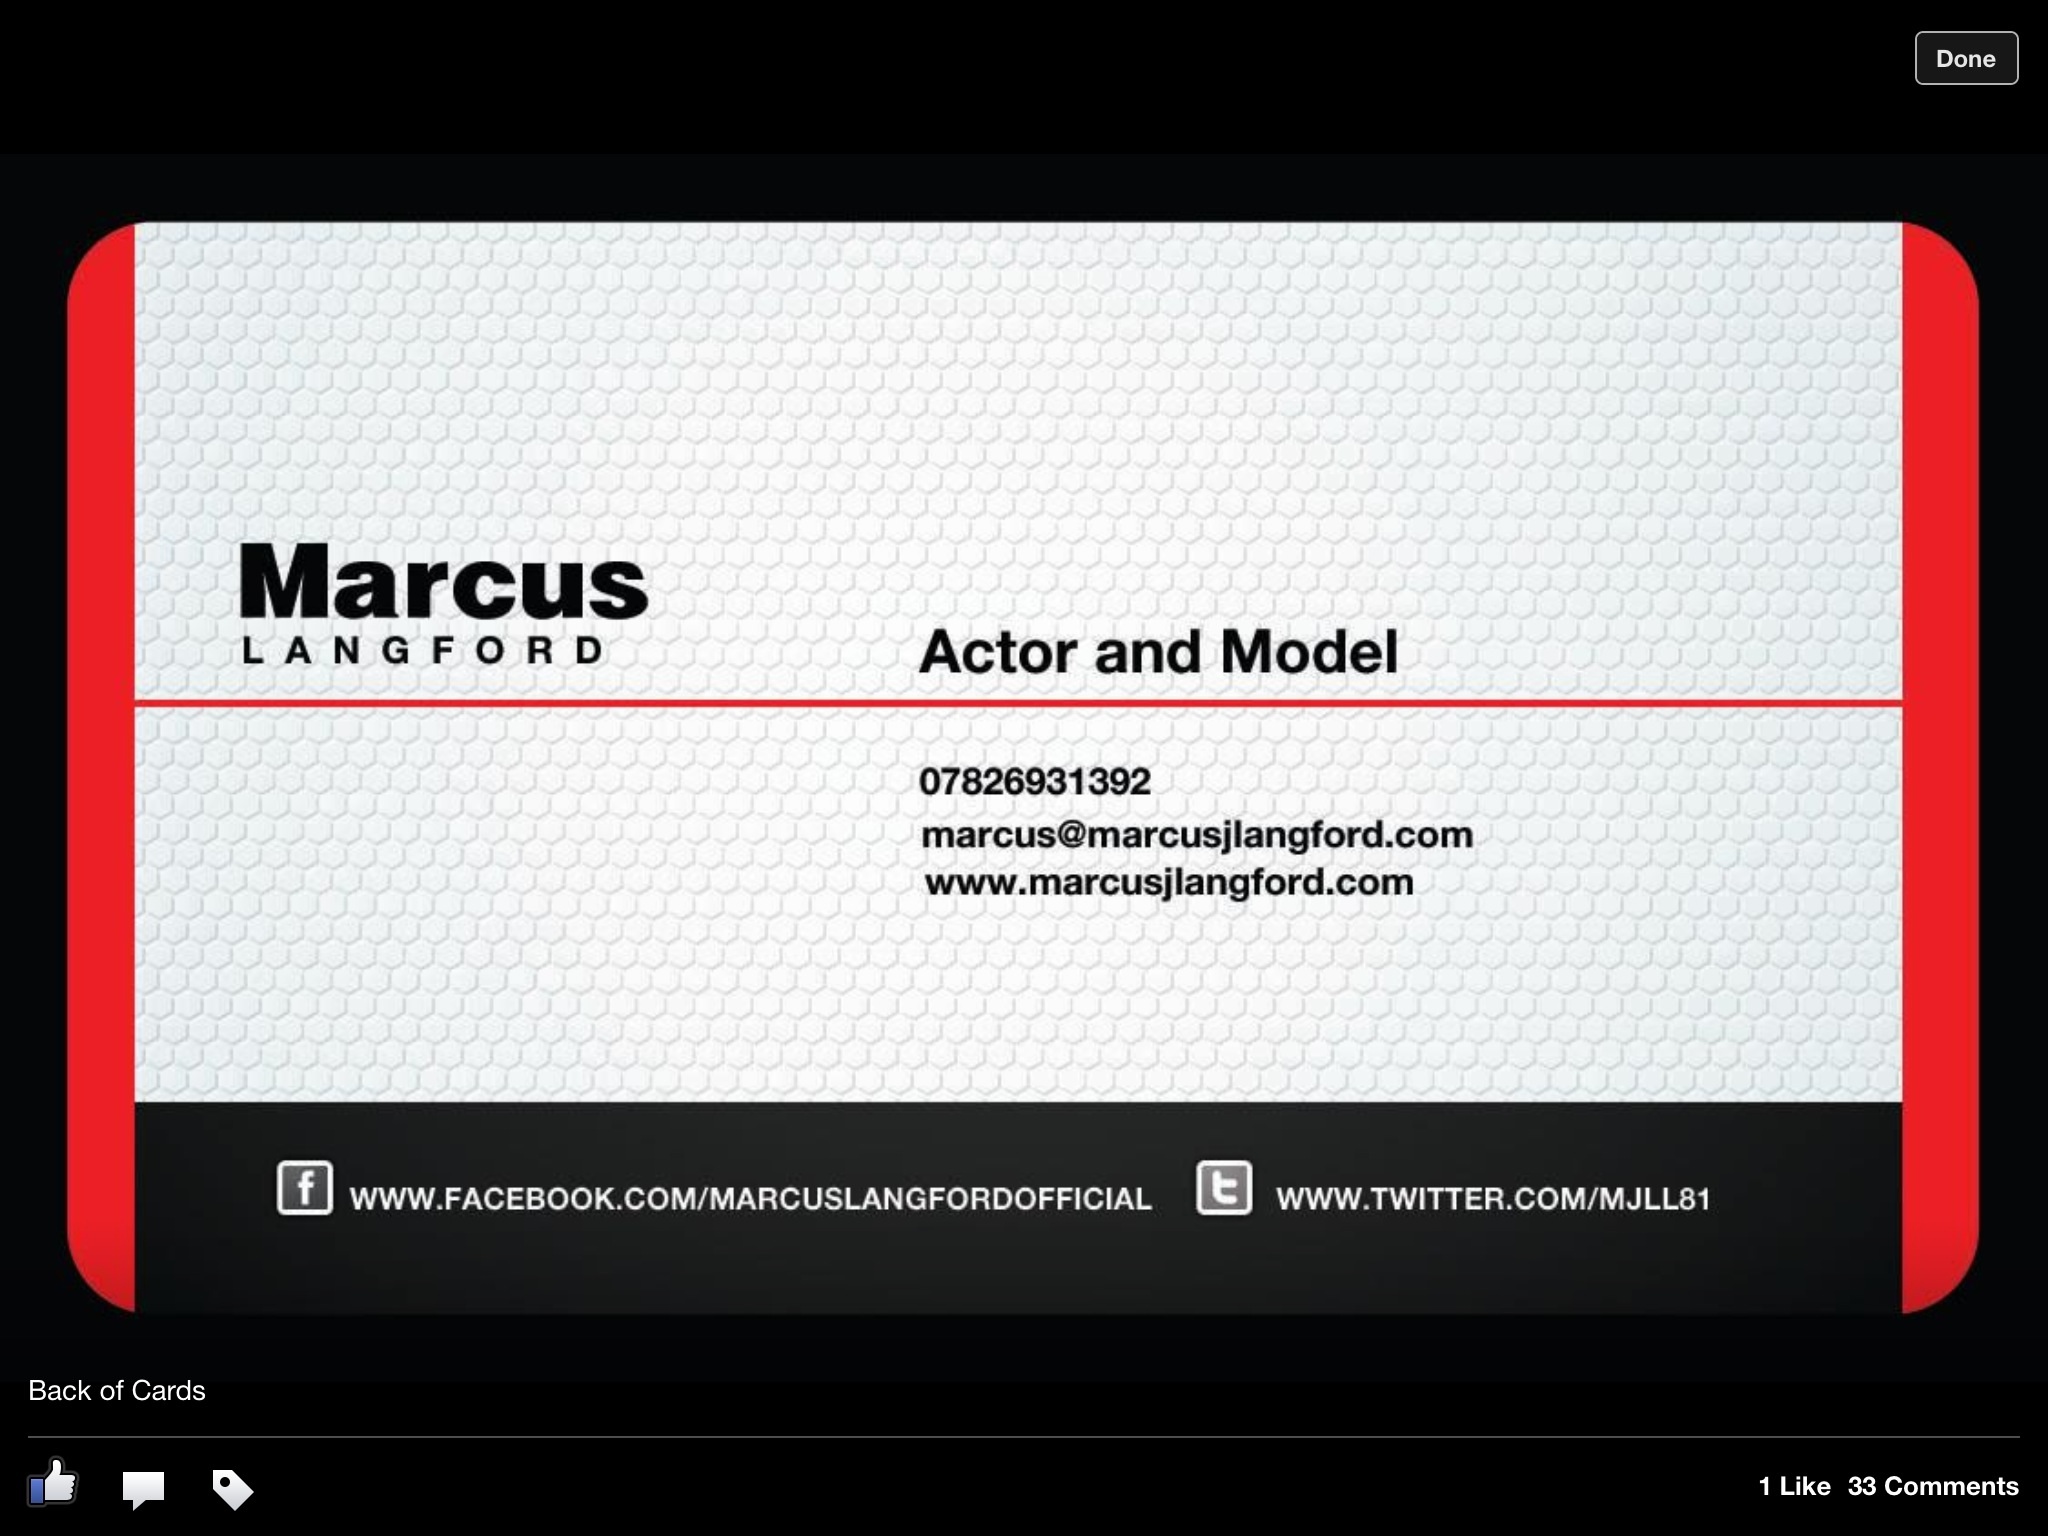 My business card!